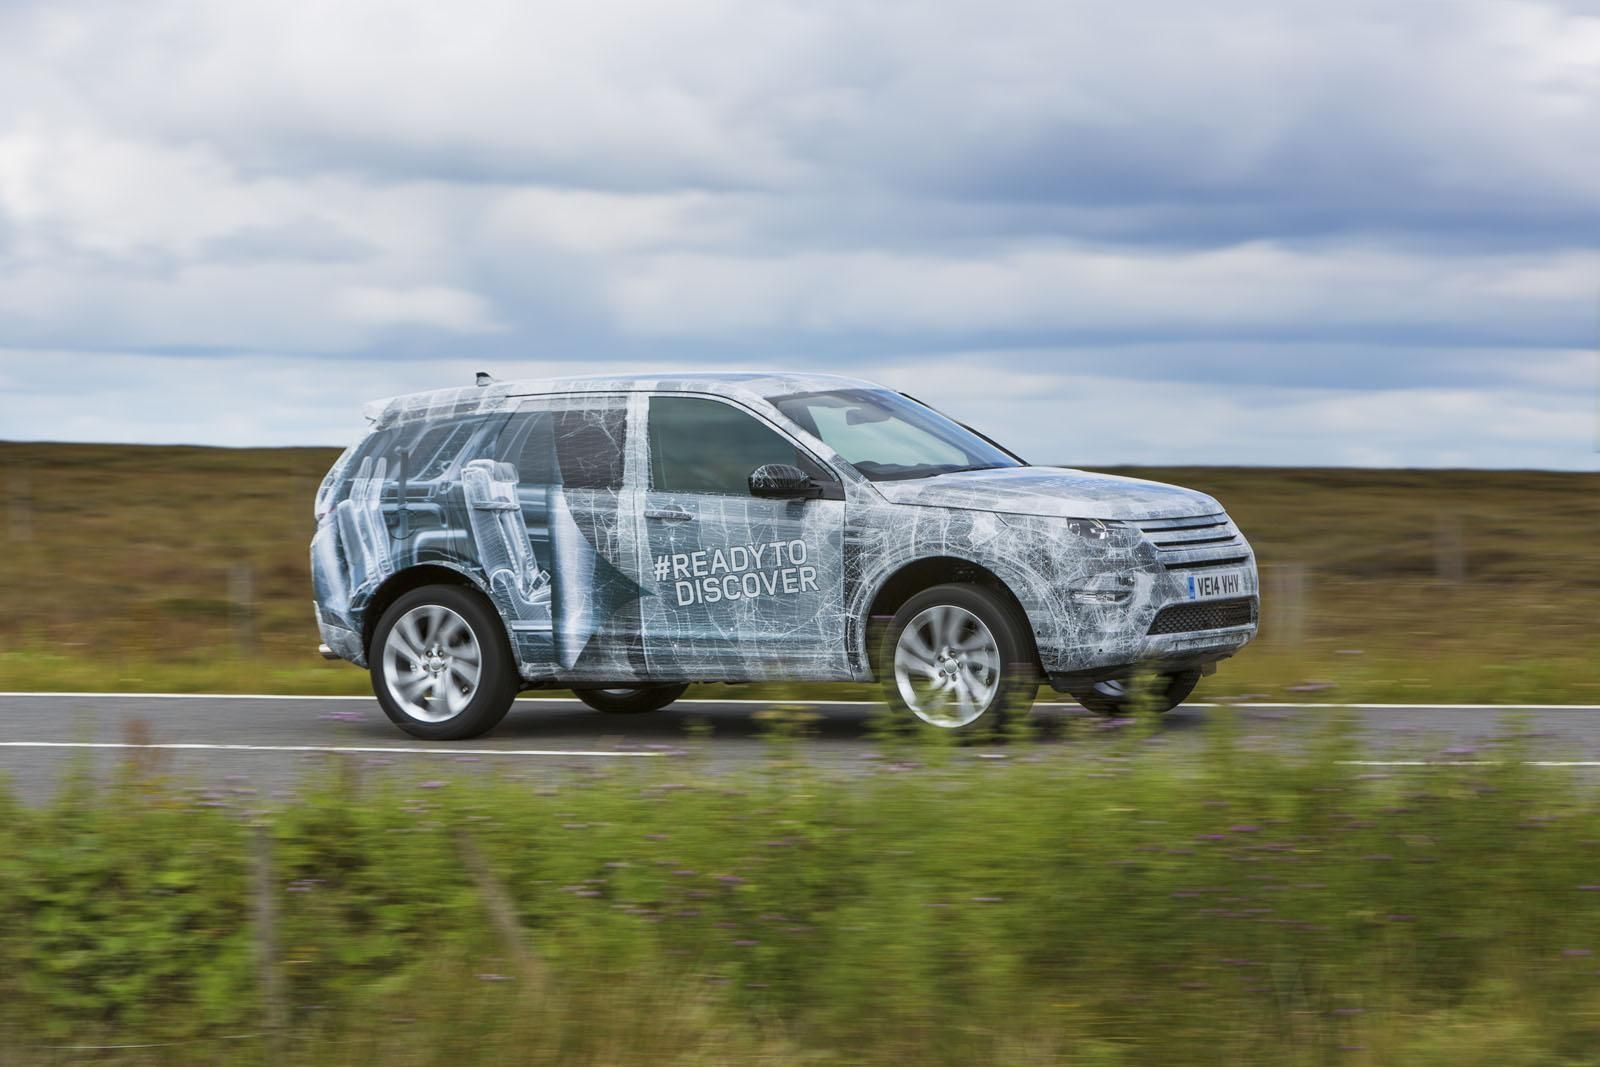 2015 LAND ROVER DSCOVERY SPORT PUCU RESM GALERS